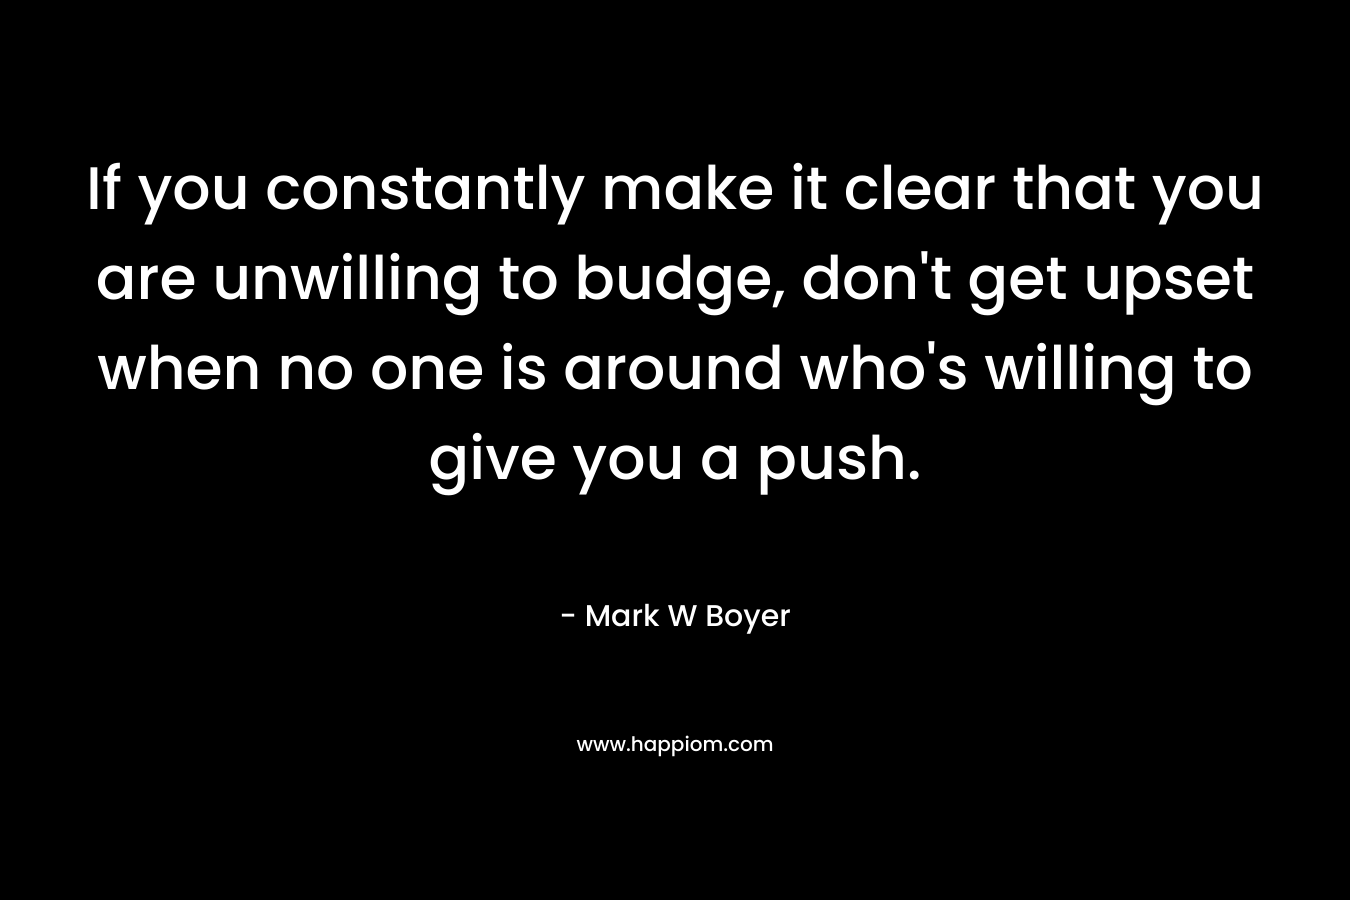 If you constantly make it clear that you are unwilling to budge, don’t get upset when no one is around who’s willing to give you a push. – Mark W Boyer